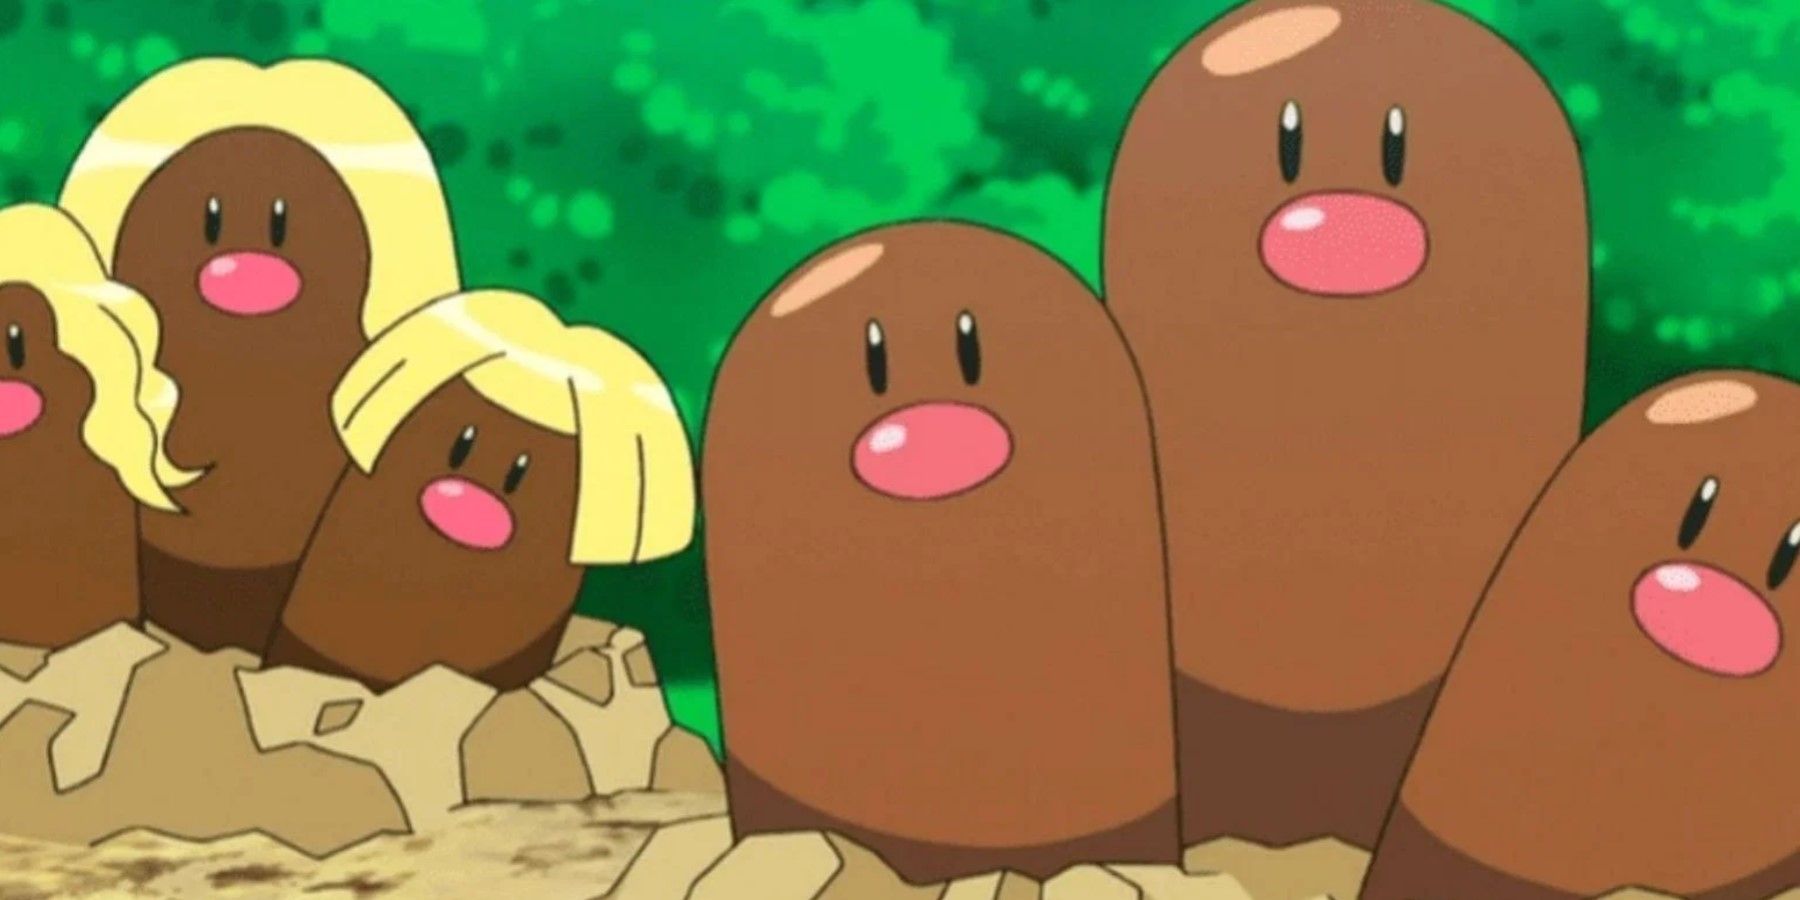 Rumor: Possible Pokemon Scarlet and Violet Leaks Reveal Diglett and  Spritzee Regional Forms